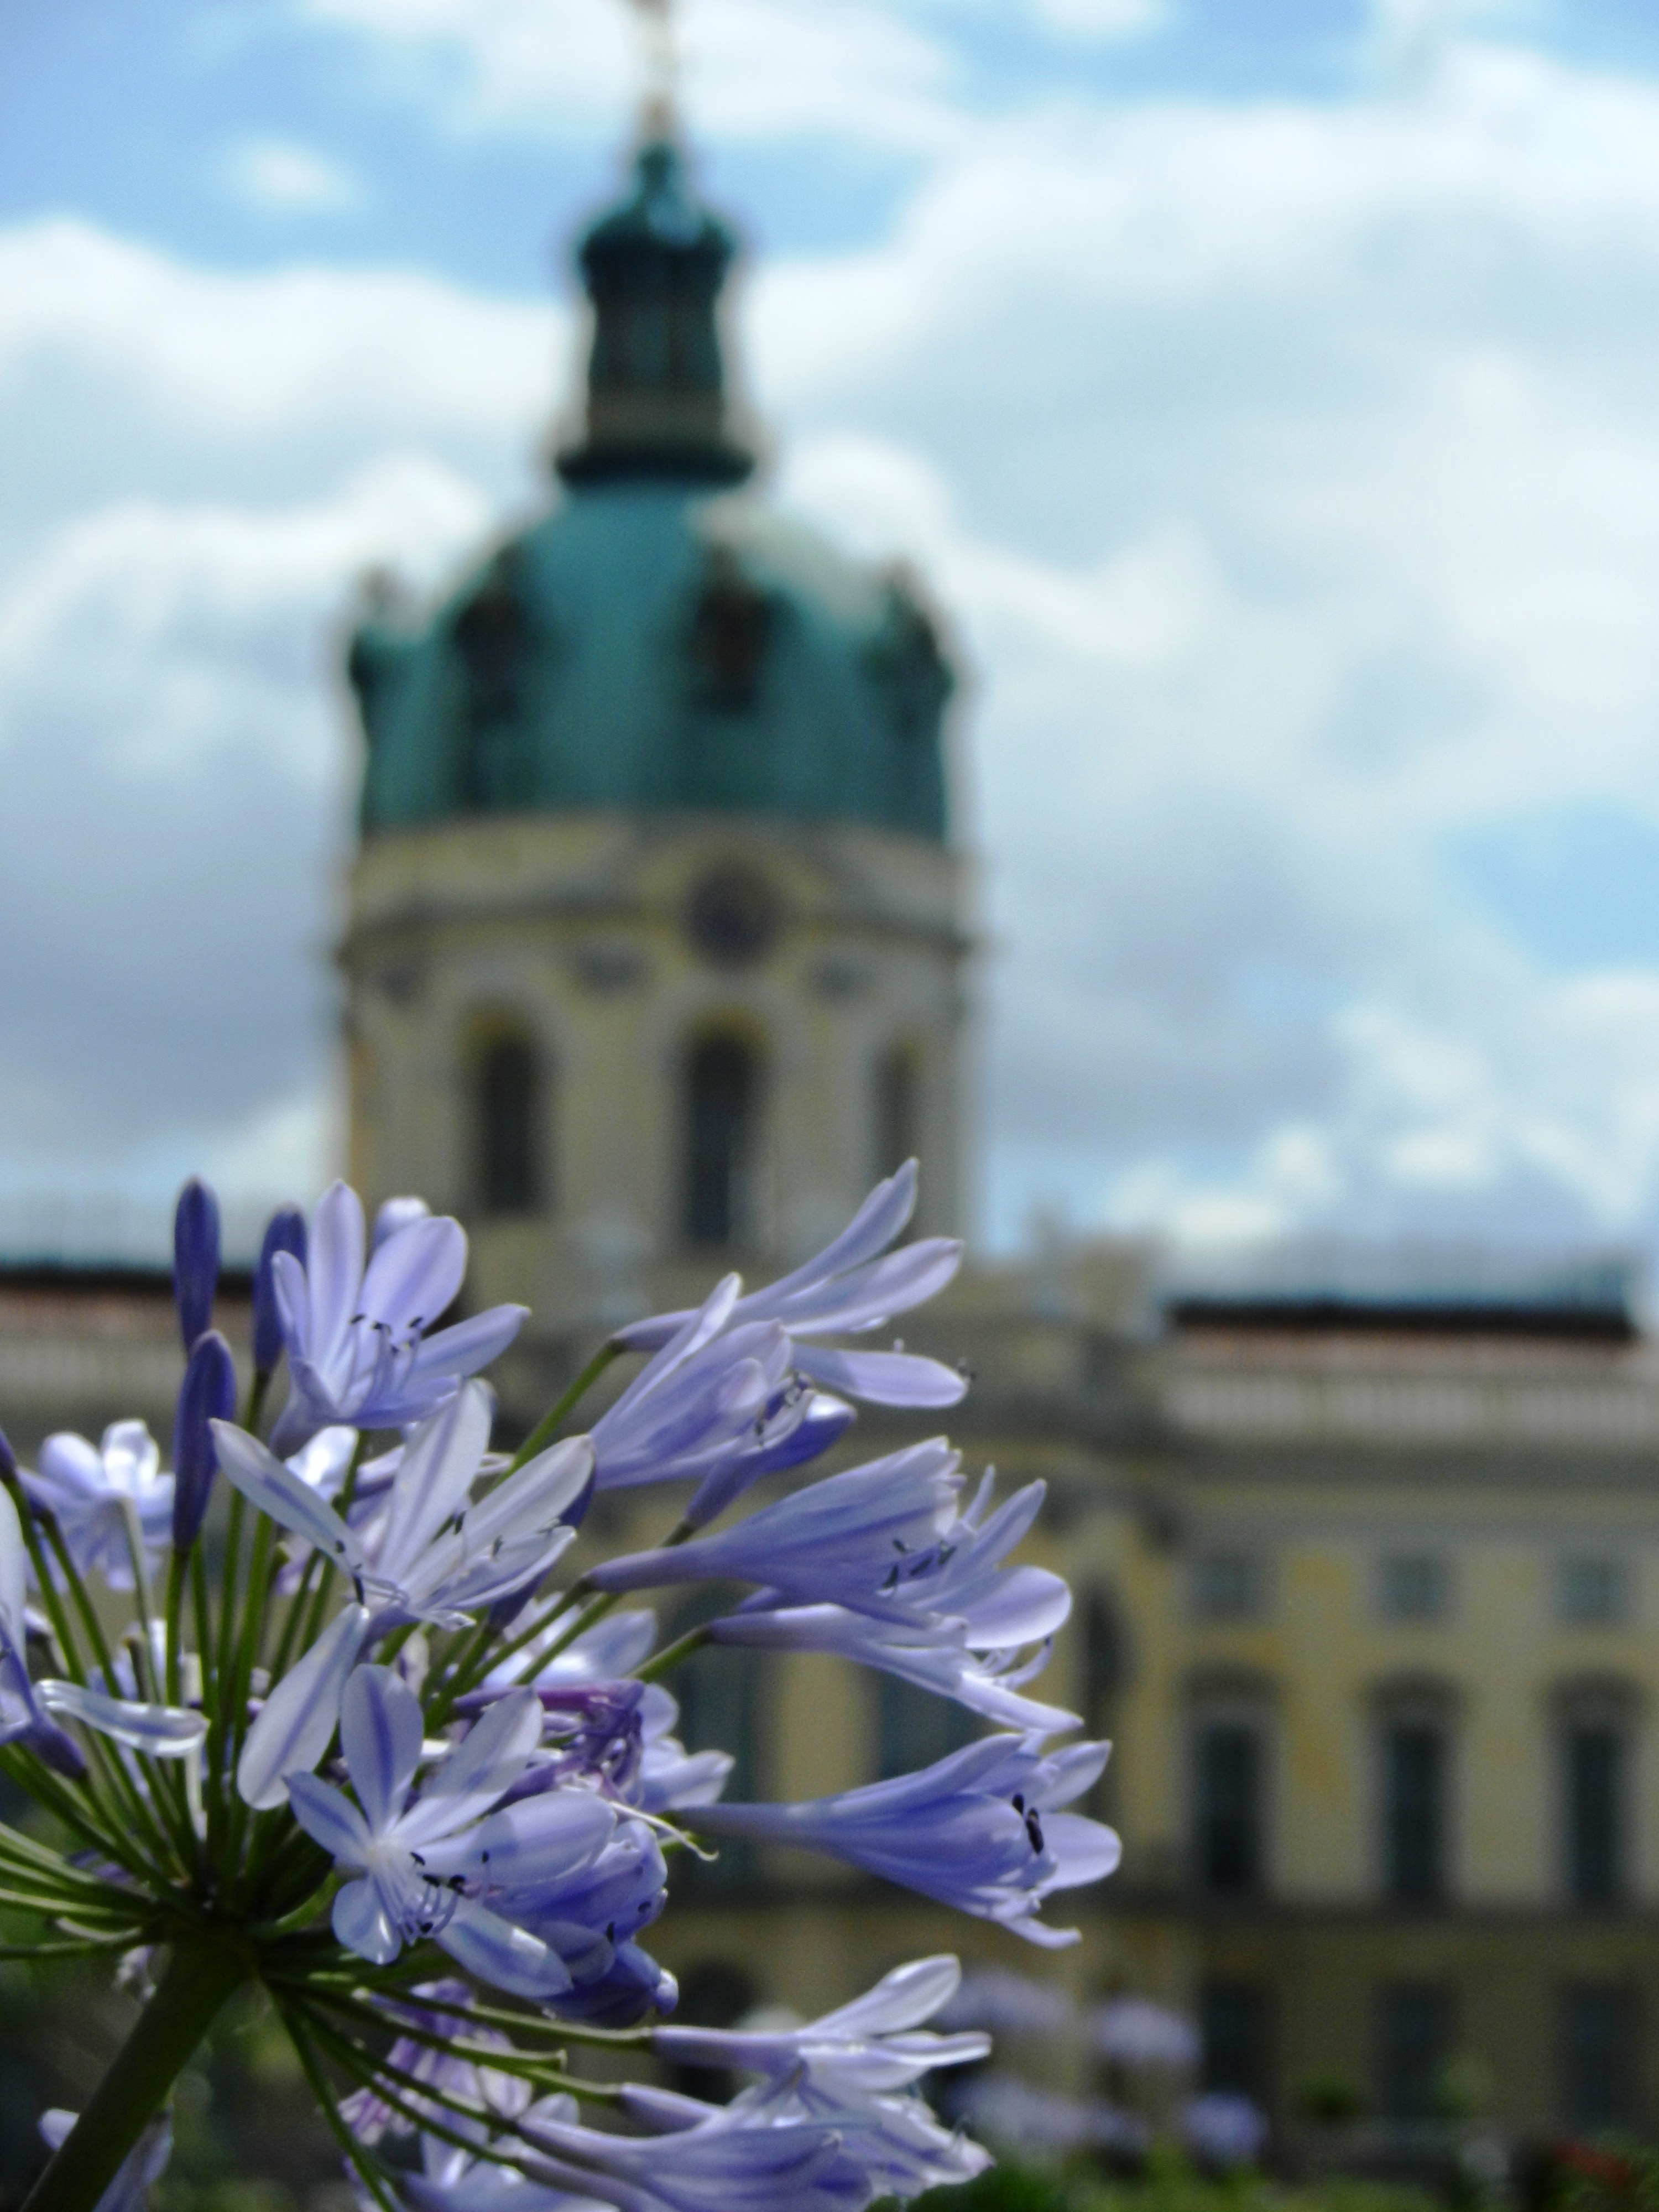 Castle, Monument, Sky, The Palace, flower, no people